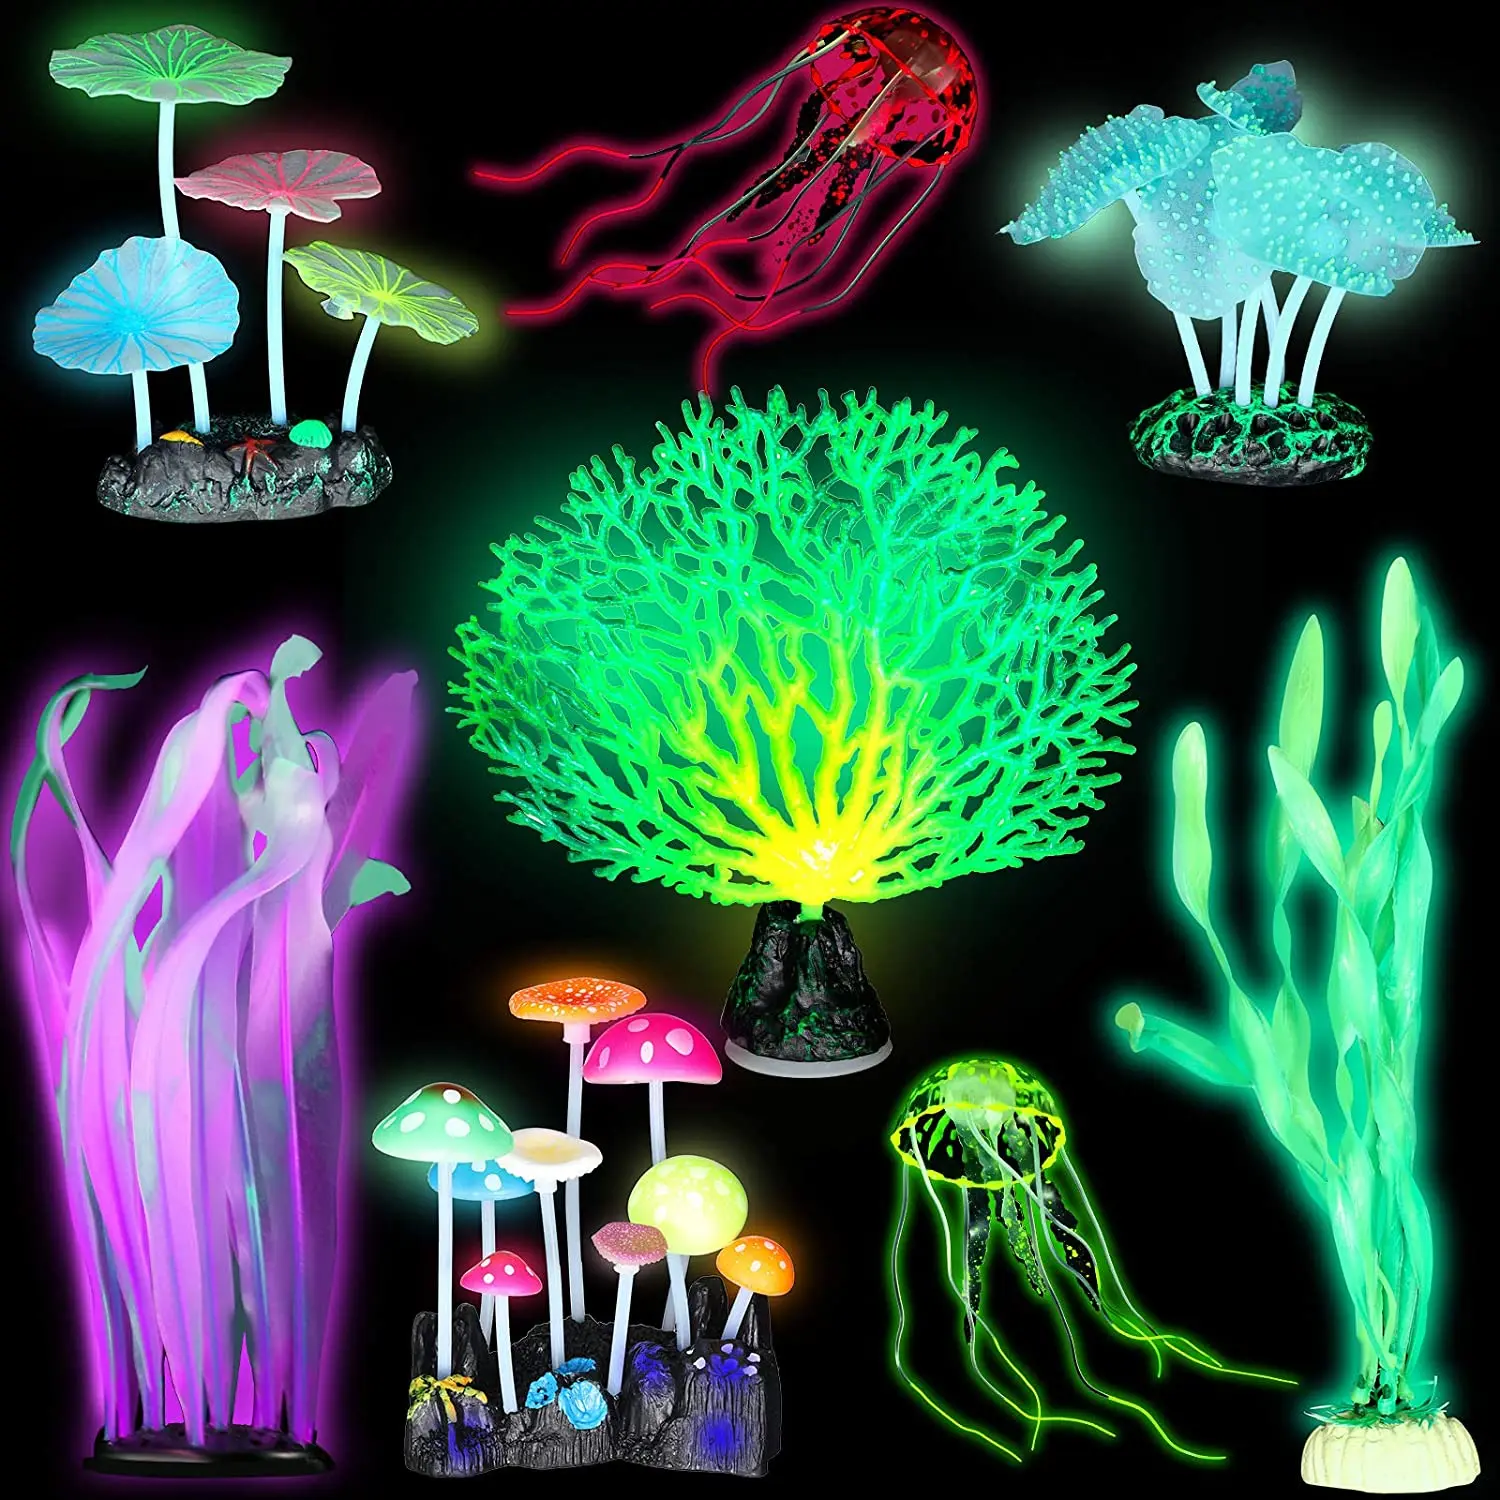 

8 Pieces Glowing Fish Tank Decorations Plants with 2 Style Glowing Kelp, Sea Anemone, Simulation Coral, Jellyfish for Aquarium